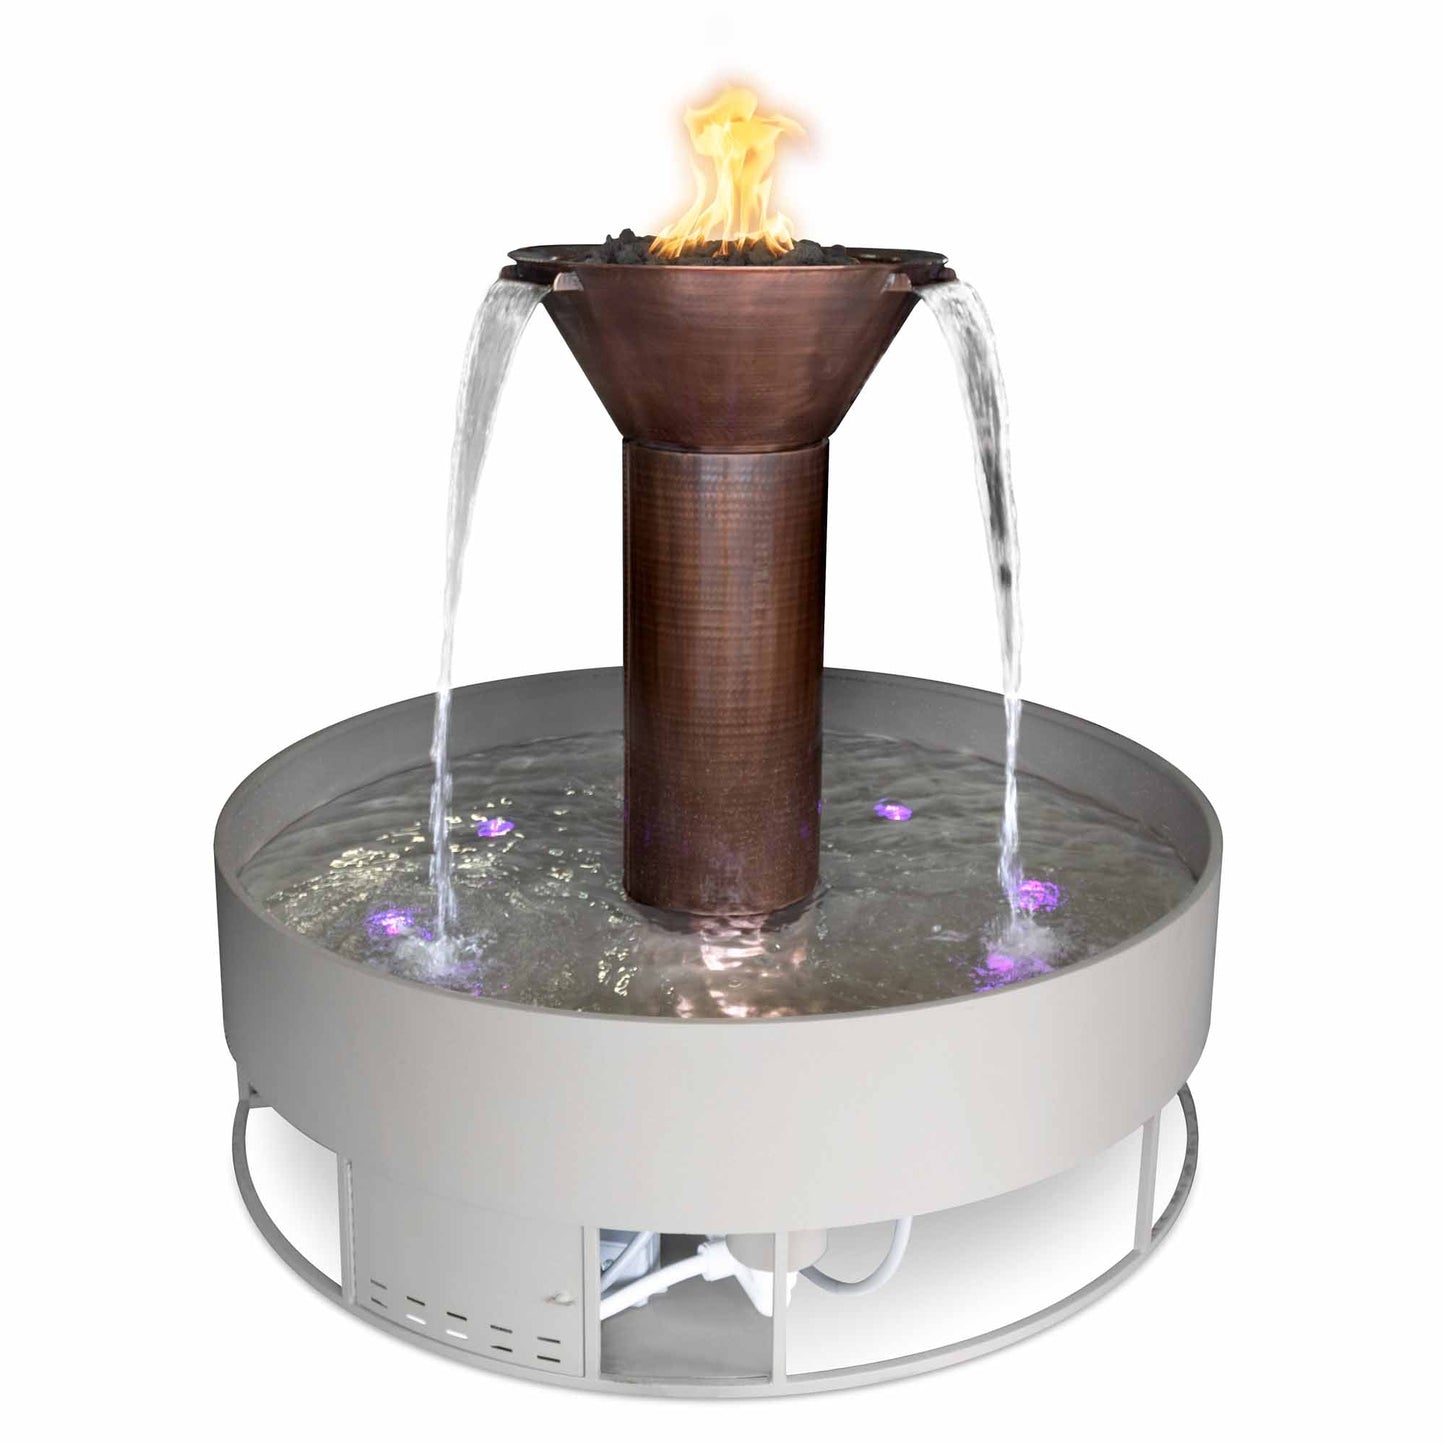 The Outdoor Plus Round Olympian 60" Copper Liquid Propane Fire & Water 3-way Spill Fountain with 12V Electronic Ignition